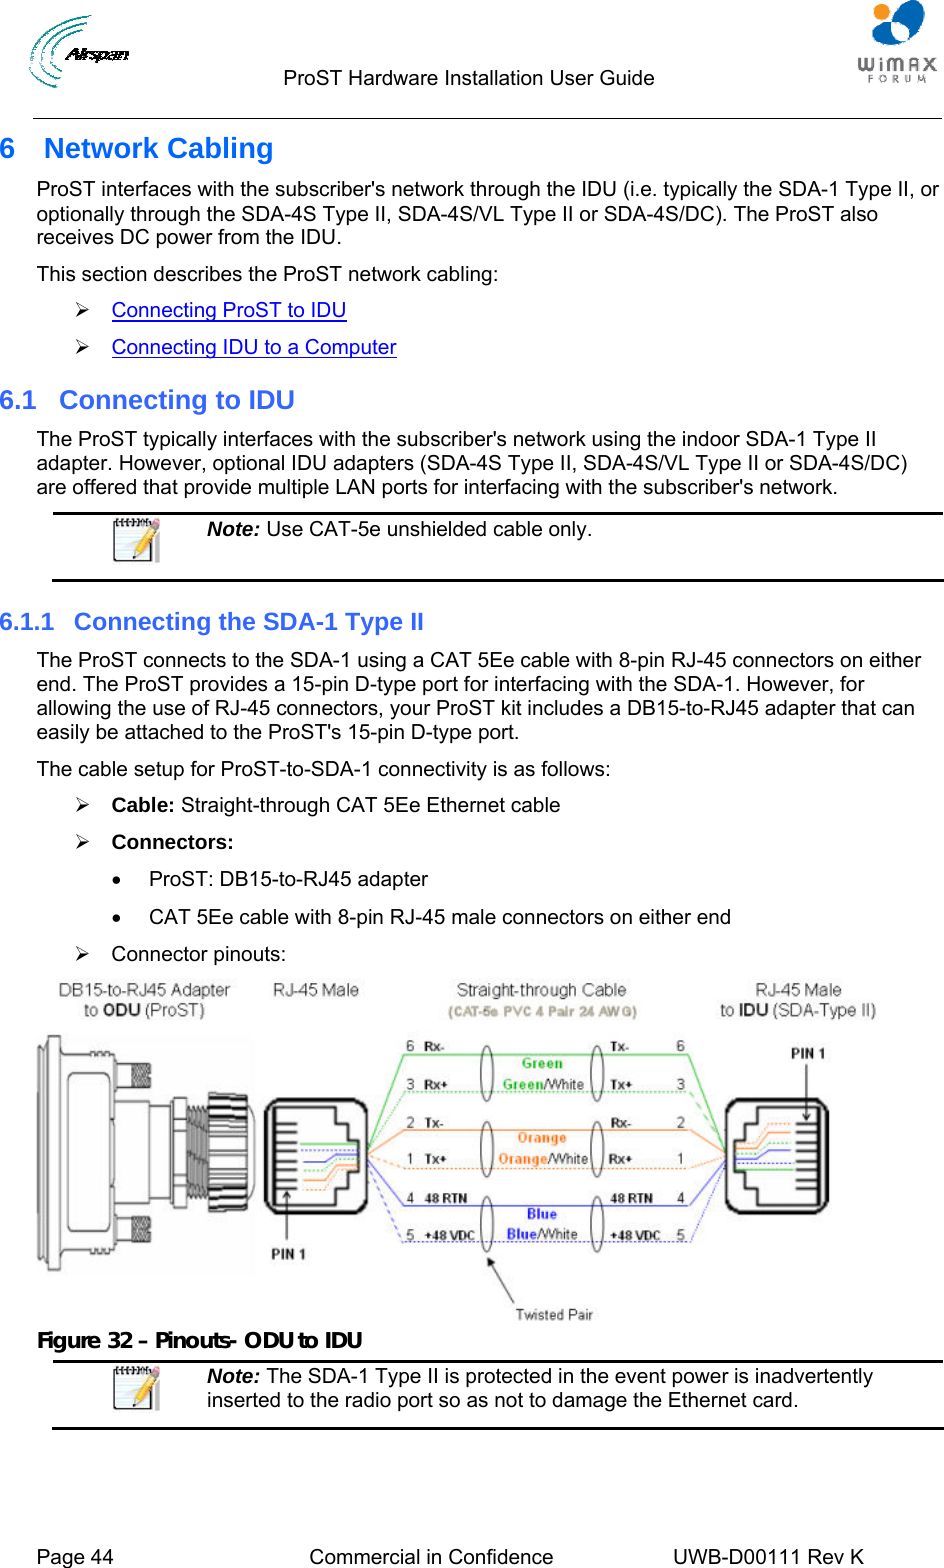                                  ProST Hardware Installation User Guide     Page 44  Commercial in Confidence  UWB-D00111 Rev K   6 Network Cabling ProST interfaces with the subscriber&apos;s network through the IDU (i.e. typically the SDA-1 Type II, or optionally through the SDA-4S Type II, SDA-4S/VL Type II or SDA-4S/DC). The ProST also receives DC power from the IDU.  This section describes the ProST network cabling: ¾ 2Connecting ProST to IDU ¾ 2Connecting IDU to a Computer 6.1  Connecting to IDU The ProST typically interfaces with the subscriber&apos;s network using the indoor SDA-1 Type II adapter. However, optional IDU adapters (SDA-4S Type II, SDA-4S/VL Type II or SDA-4S/DC) are offered that provide multiple LAN ports for interfacing with the subscriber&apos;s network.   Note: Use CAT-5e unshielded cable only. 6.1.1  Connecting the SDA-1 Type II The ProST connects to the SDA-1 using a CAT 5Ee cable with 8-pin RJ-45 connectors on either end. The ProST provides a 15-pin D-type port for interfacing with the SDA-1. However, for allowing the use of RJ-45 connectors, your ProST kit includes a DB15-to-RJ45 adapter that can easily be attached to the ProST&apos;s 15-pin D-type port. The cable setup for ProST-to-SDA-1 connectivity is as follows: ¾ Cable: Straight-through CAT 5Ee Ethernet cable ¾ Connectors:  •  ProST: DB15-to-RJ45 adapter •  CAT 5Ee cable with 8-pin RJ-45 male connectors on either end ¾ Connector pinouts:  Figure 32 – Pinouts- ODU to IDU  Note: The SDA-1 Type II is protected in the event power is inadvertently inserted to the radio port so as not to damage the Ethernet card.  